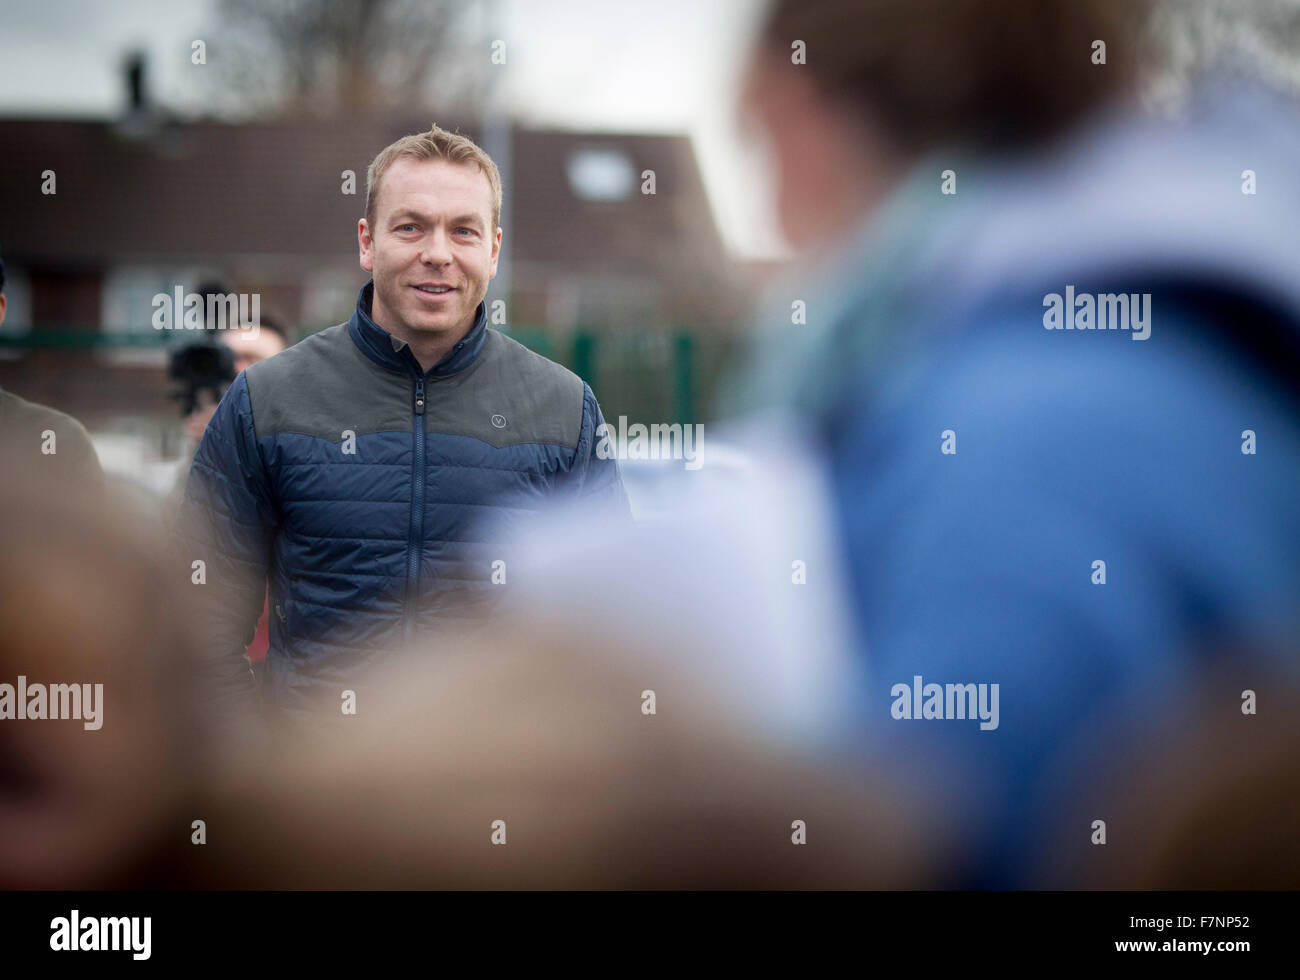 Sir Chris Hoy at a children's cycling training session Stock Photo